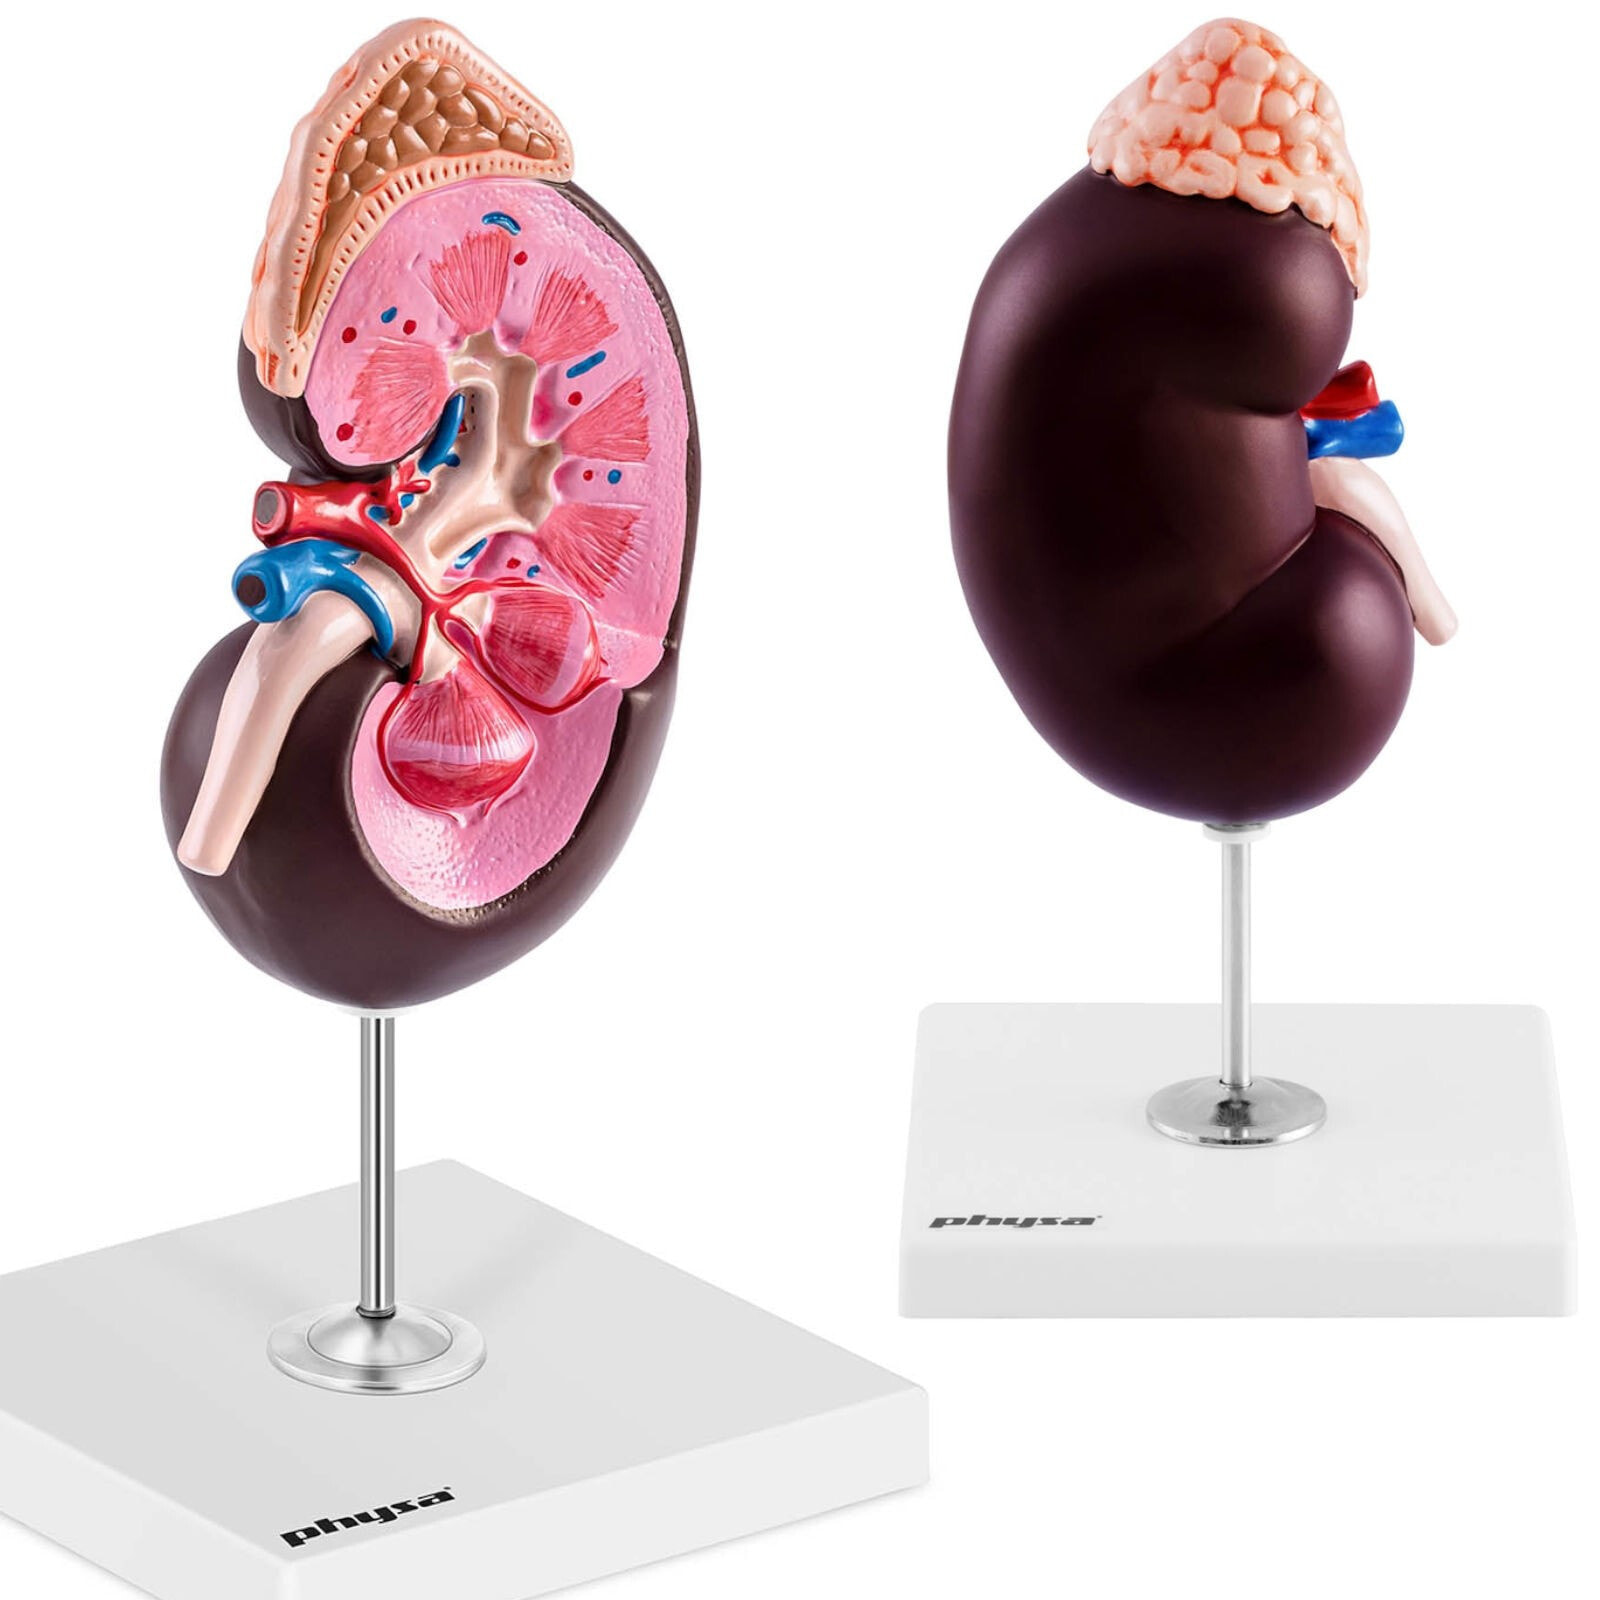 3D anatomical model of human kidney scale 1.5: 1